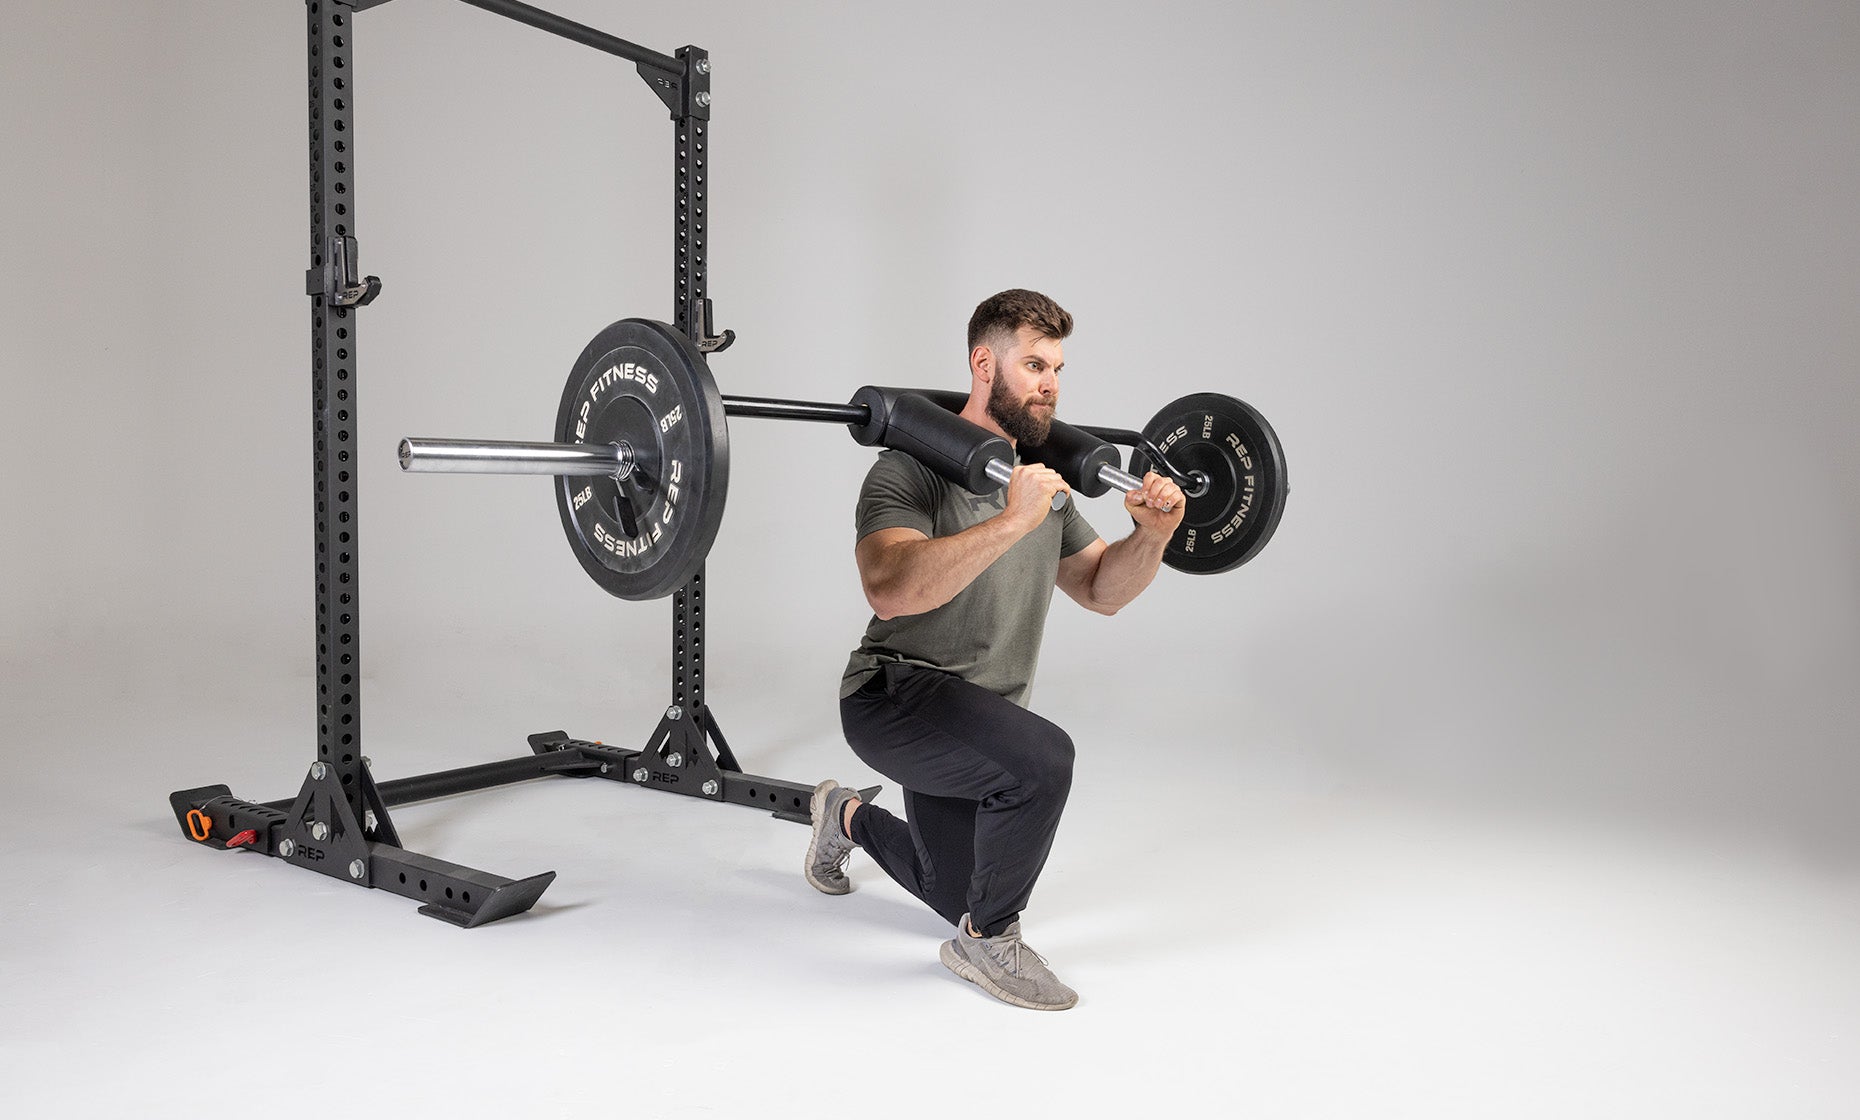 Lifter performing a lunge with a weighted Safety Squat Bar.